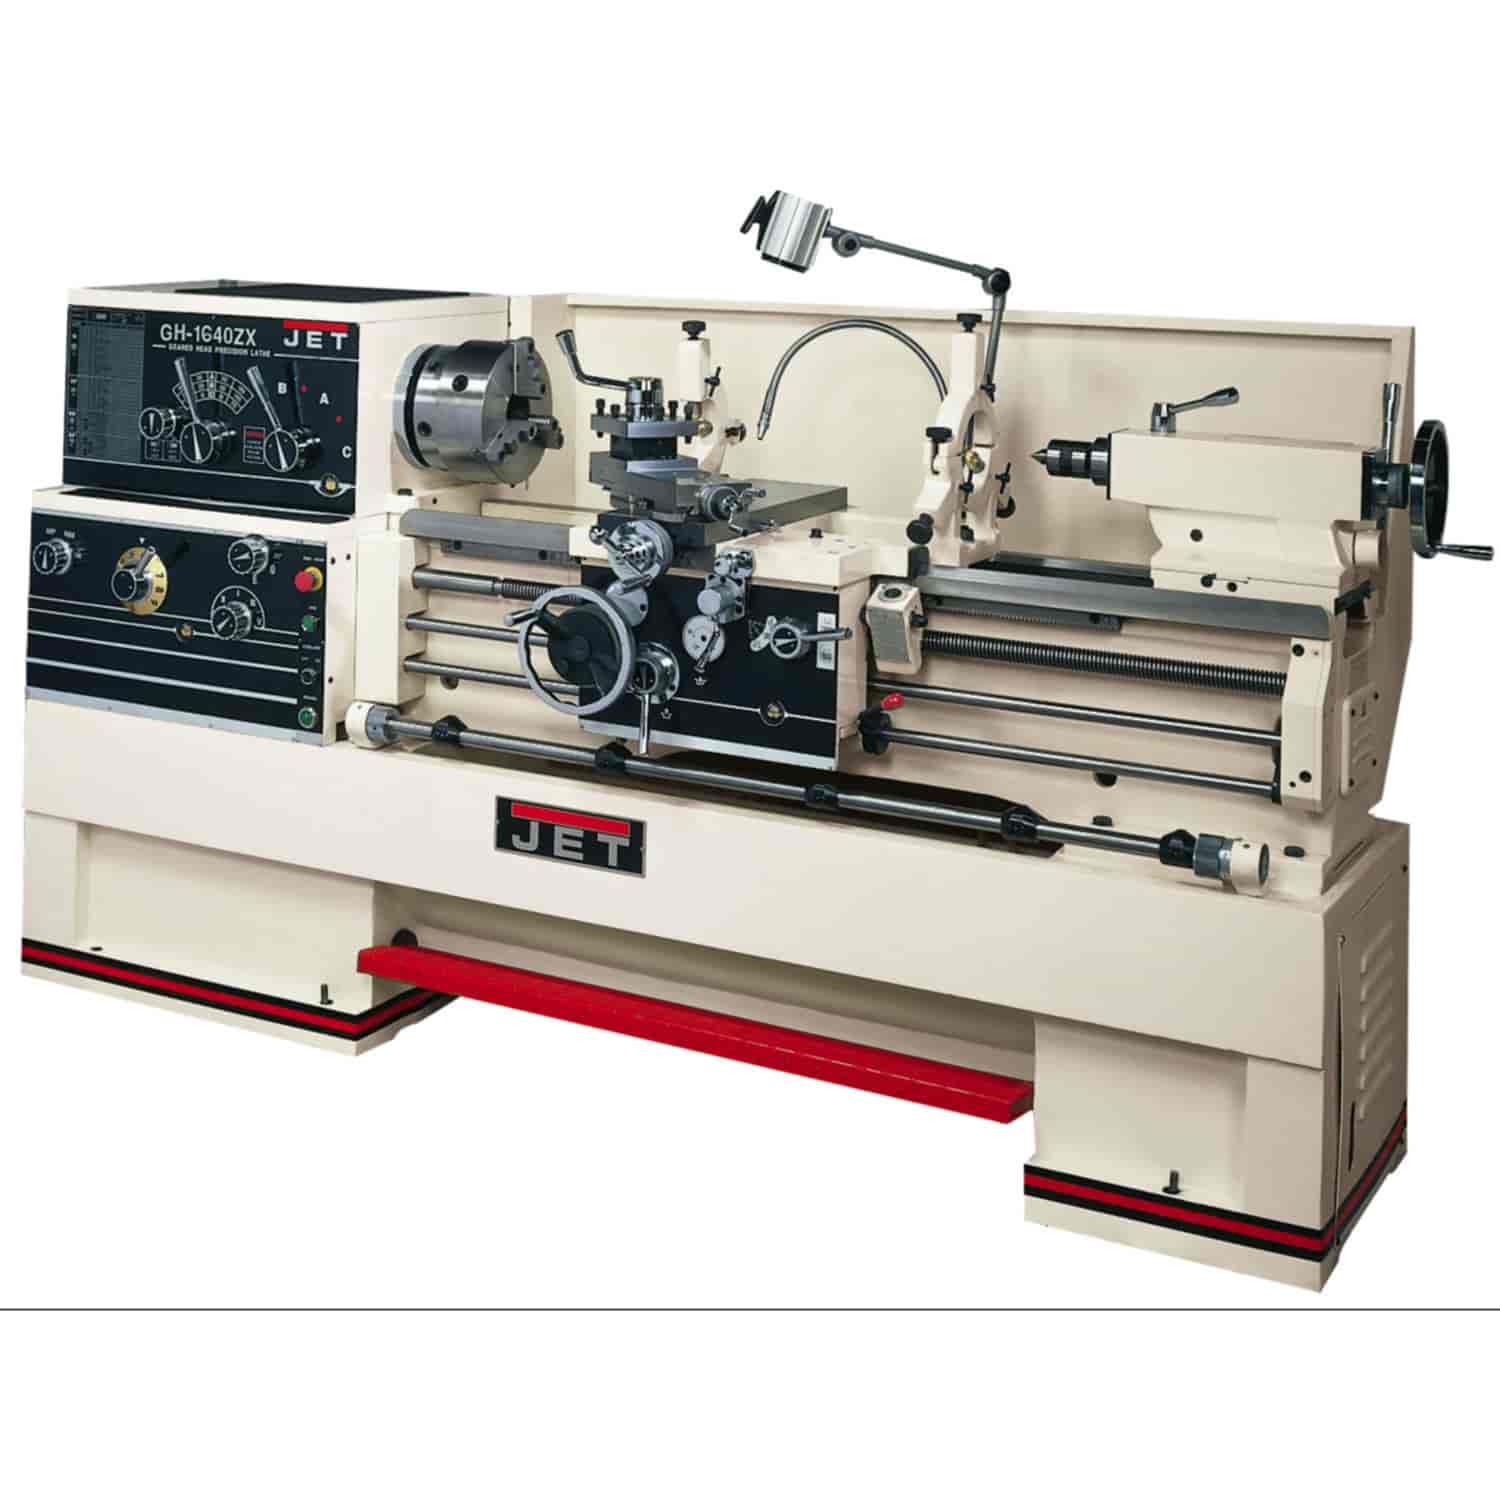 GH-1640ZX Lathe With 3-Axis Acu-Rite 200S DRO